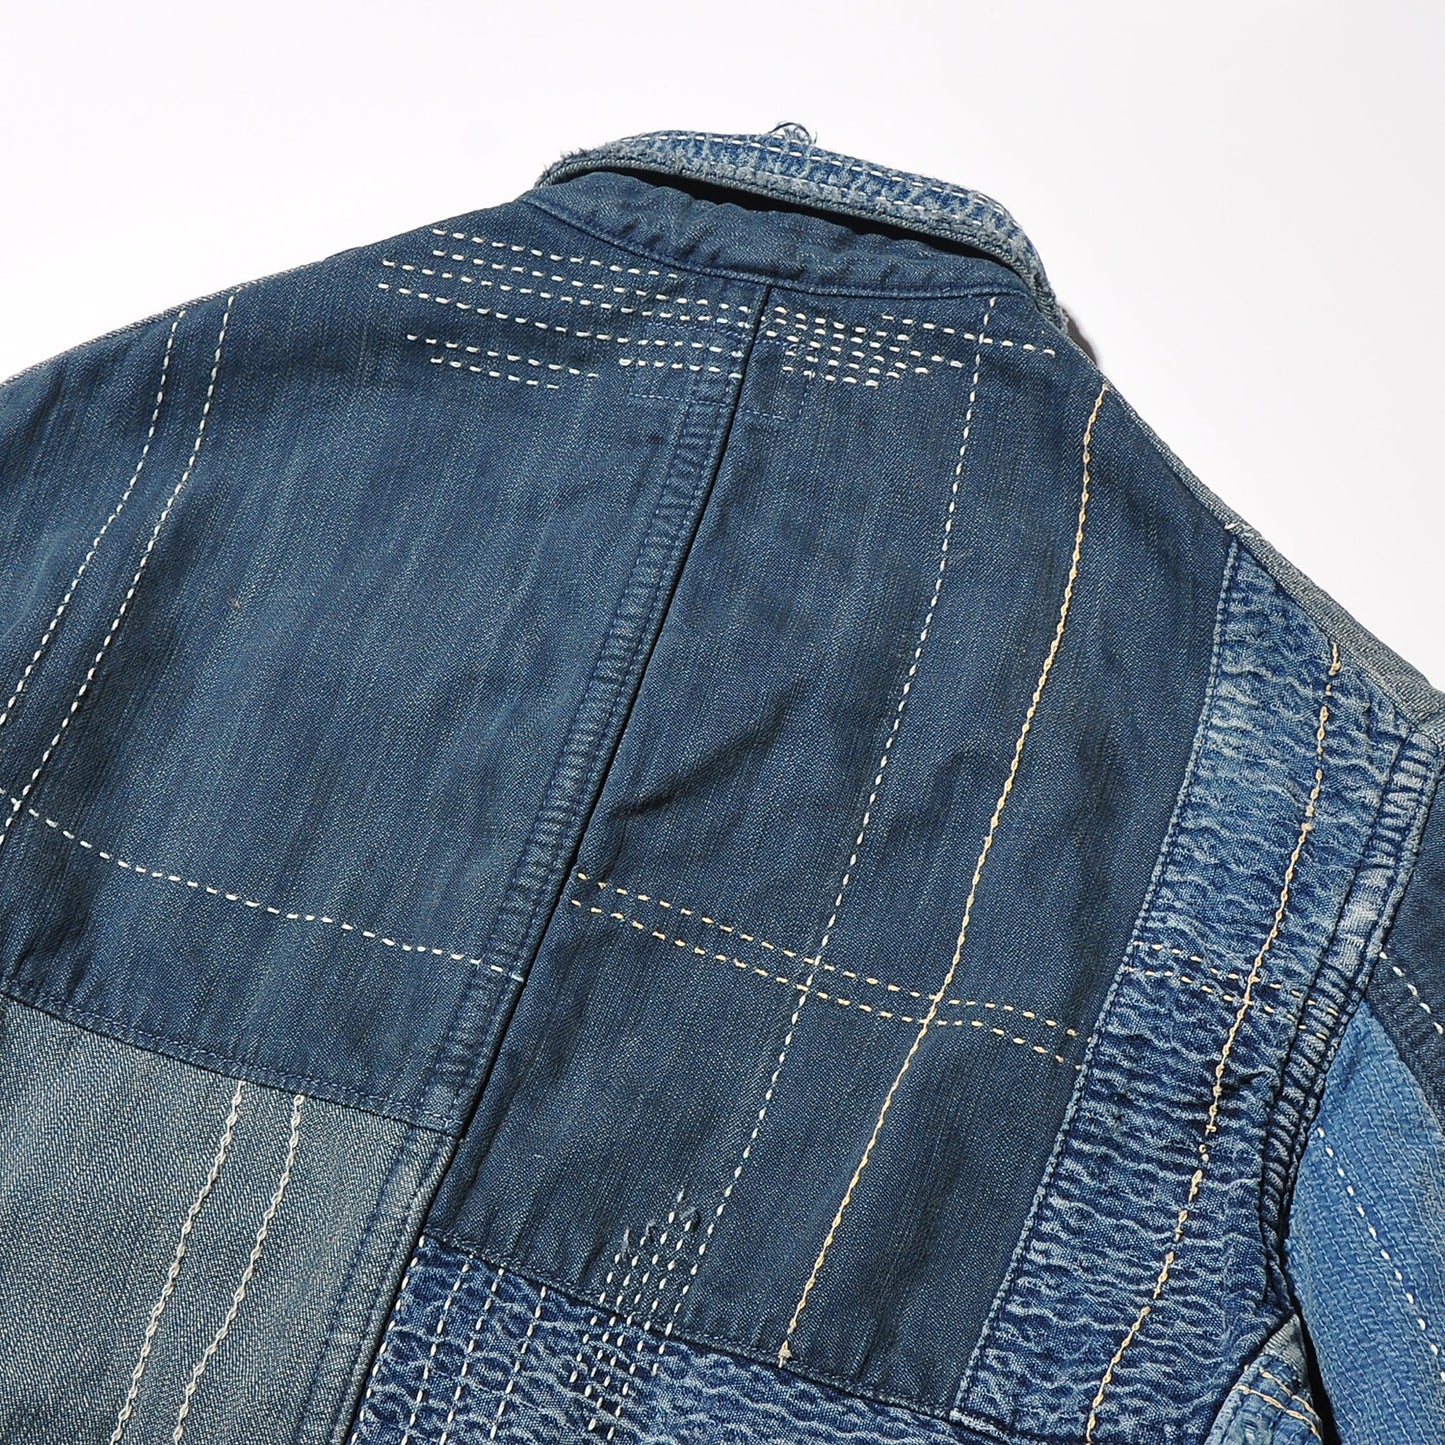 BLUE BLUE JK1912 Indigo Dyed Embroidery Special Coverall Jacket